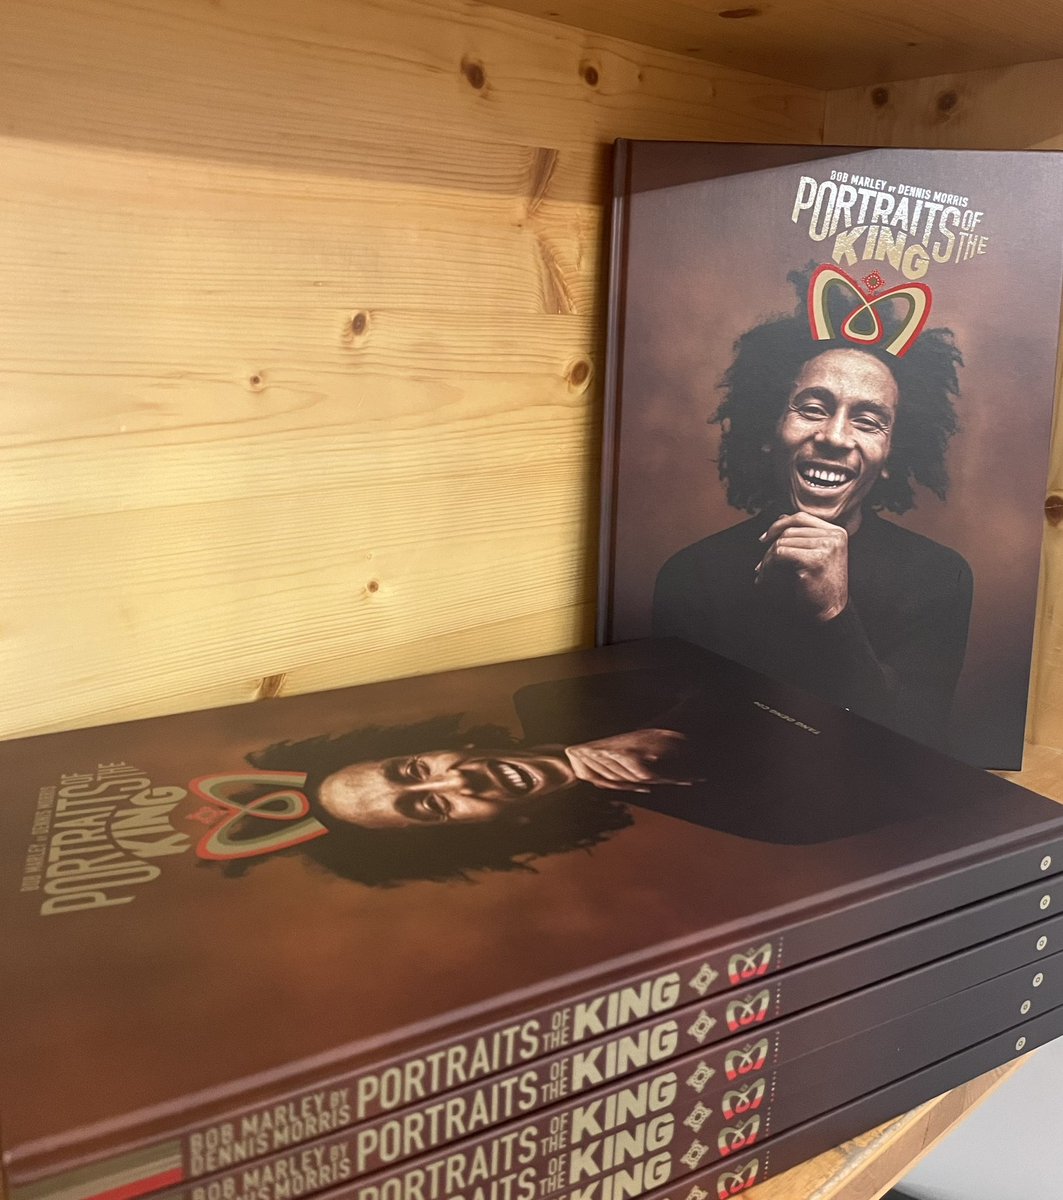 Tonight (22nd Feb) from 6 to 8 pm, I will be signing copies of my Bob Marley book at Agnes b store in Covent Garden (on floral street) London 🇬🇧 See you there! #BobMarley 📷 by #DennisMorris